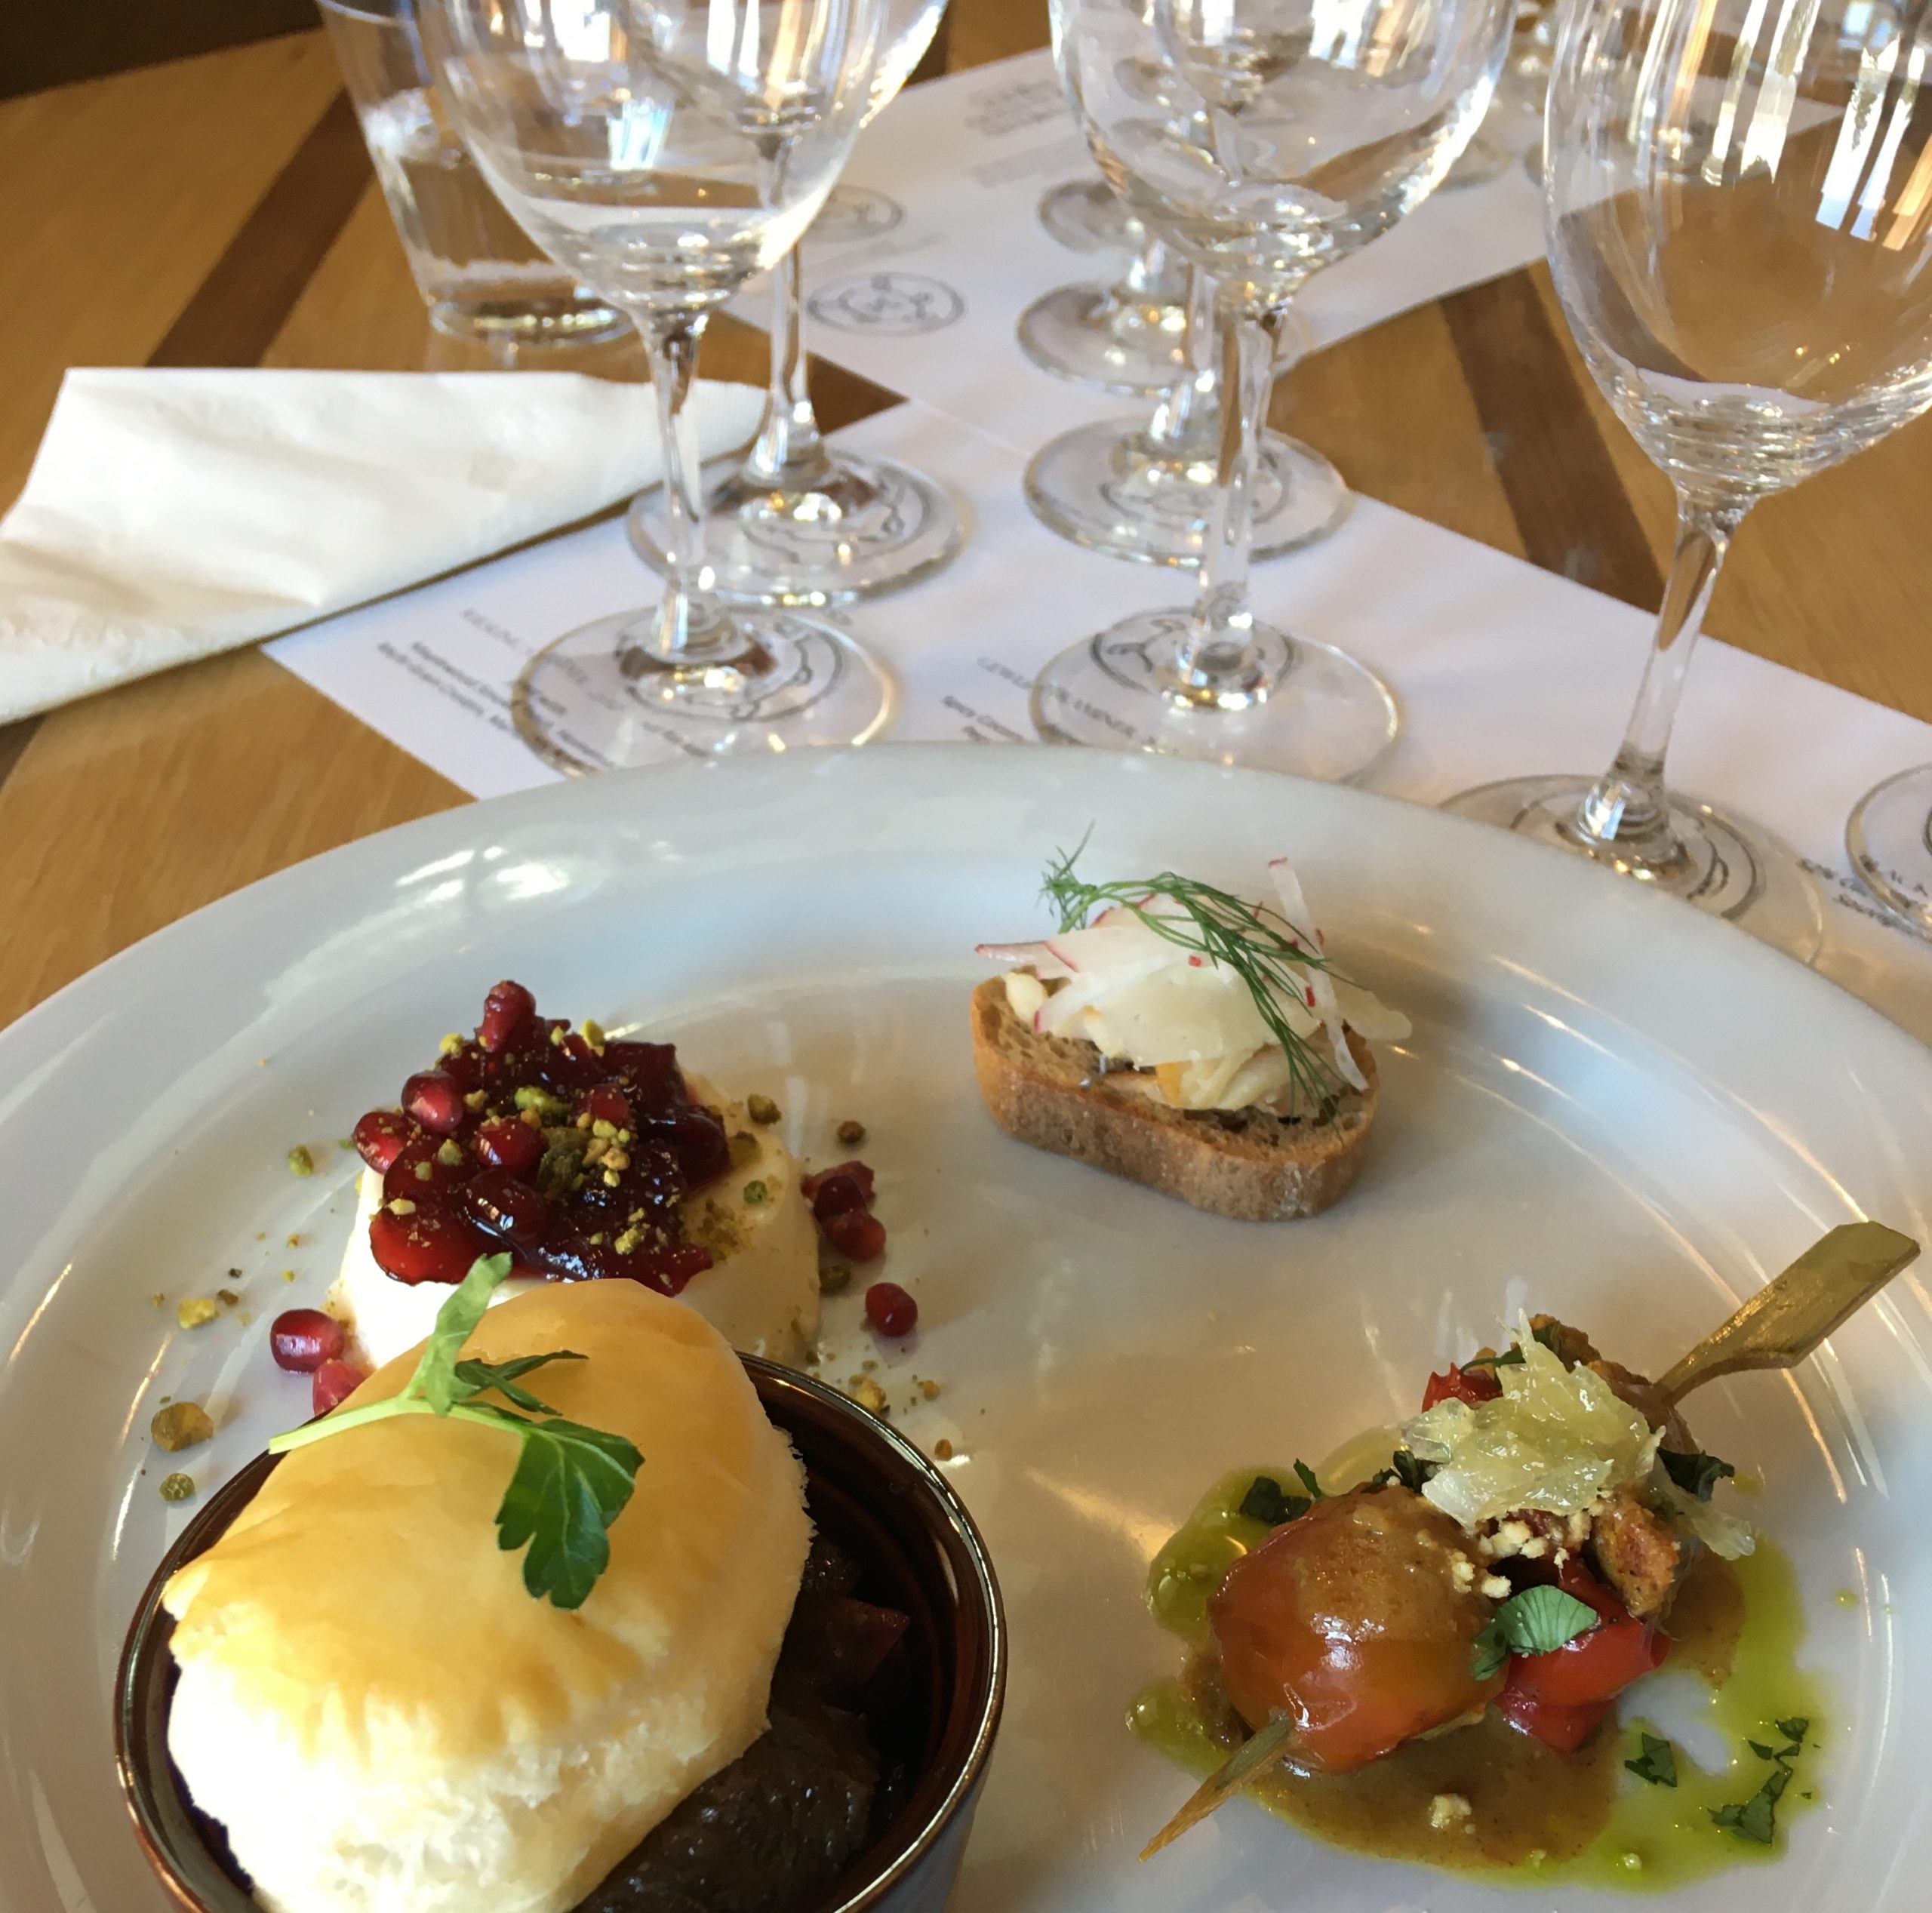 Cropped image of food and wine glasses.